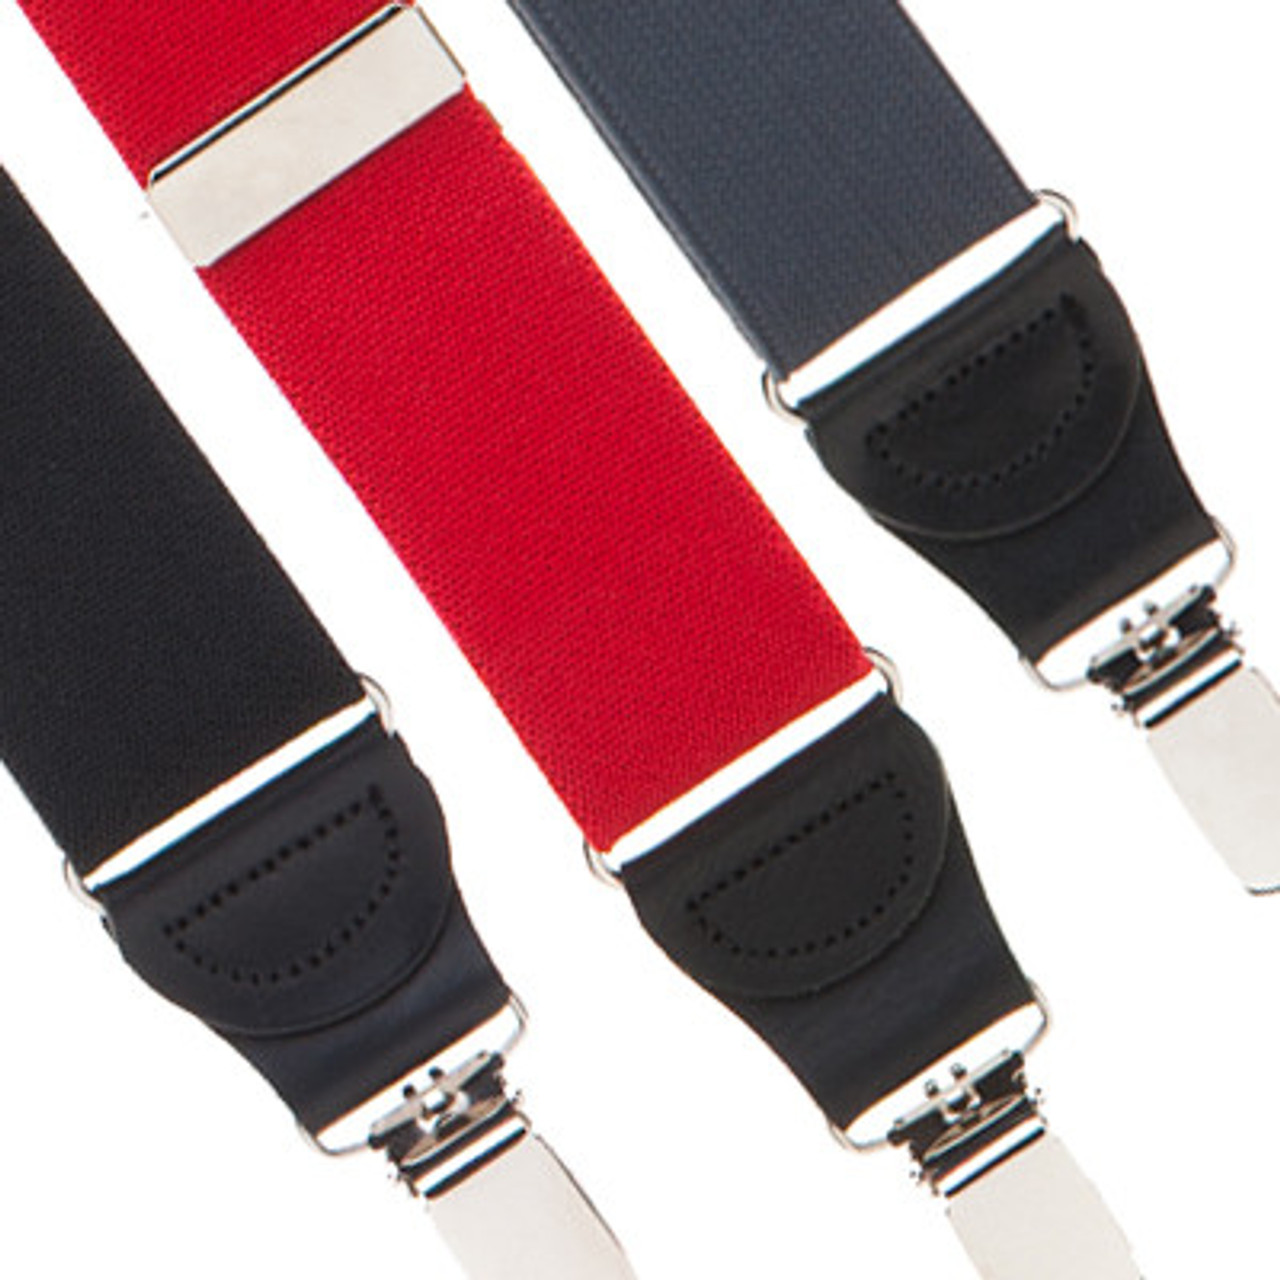 Buyless Fashion Suspenders For Men - 48 Adjustable Straps 1 1/4 - Y  Back With Clips And Buttons 